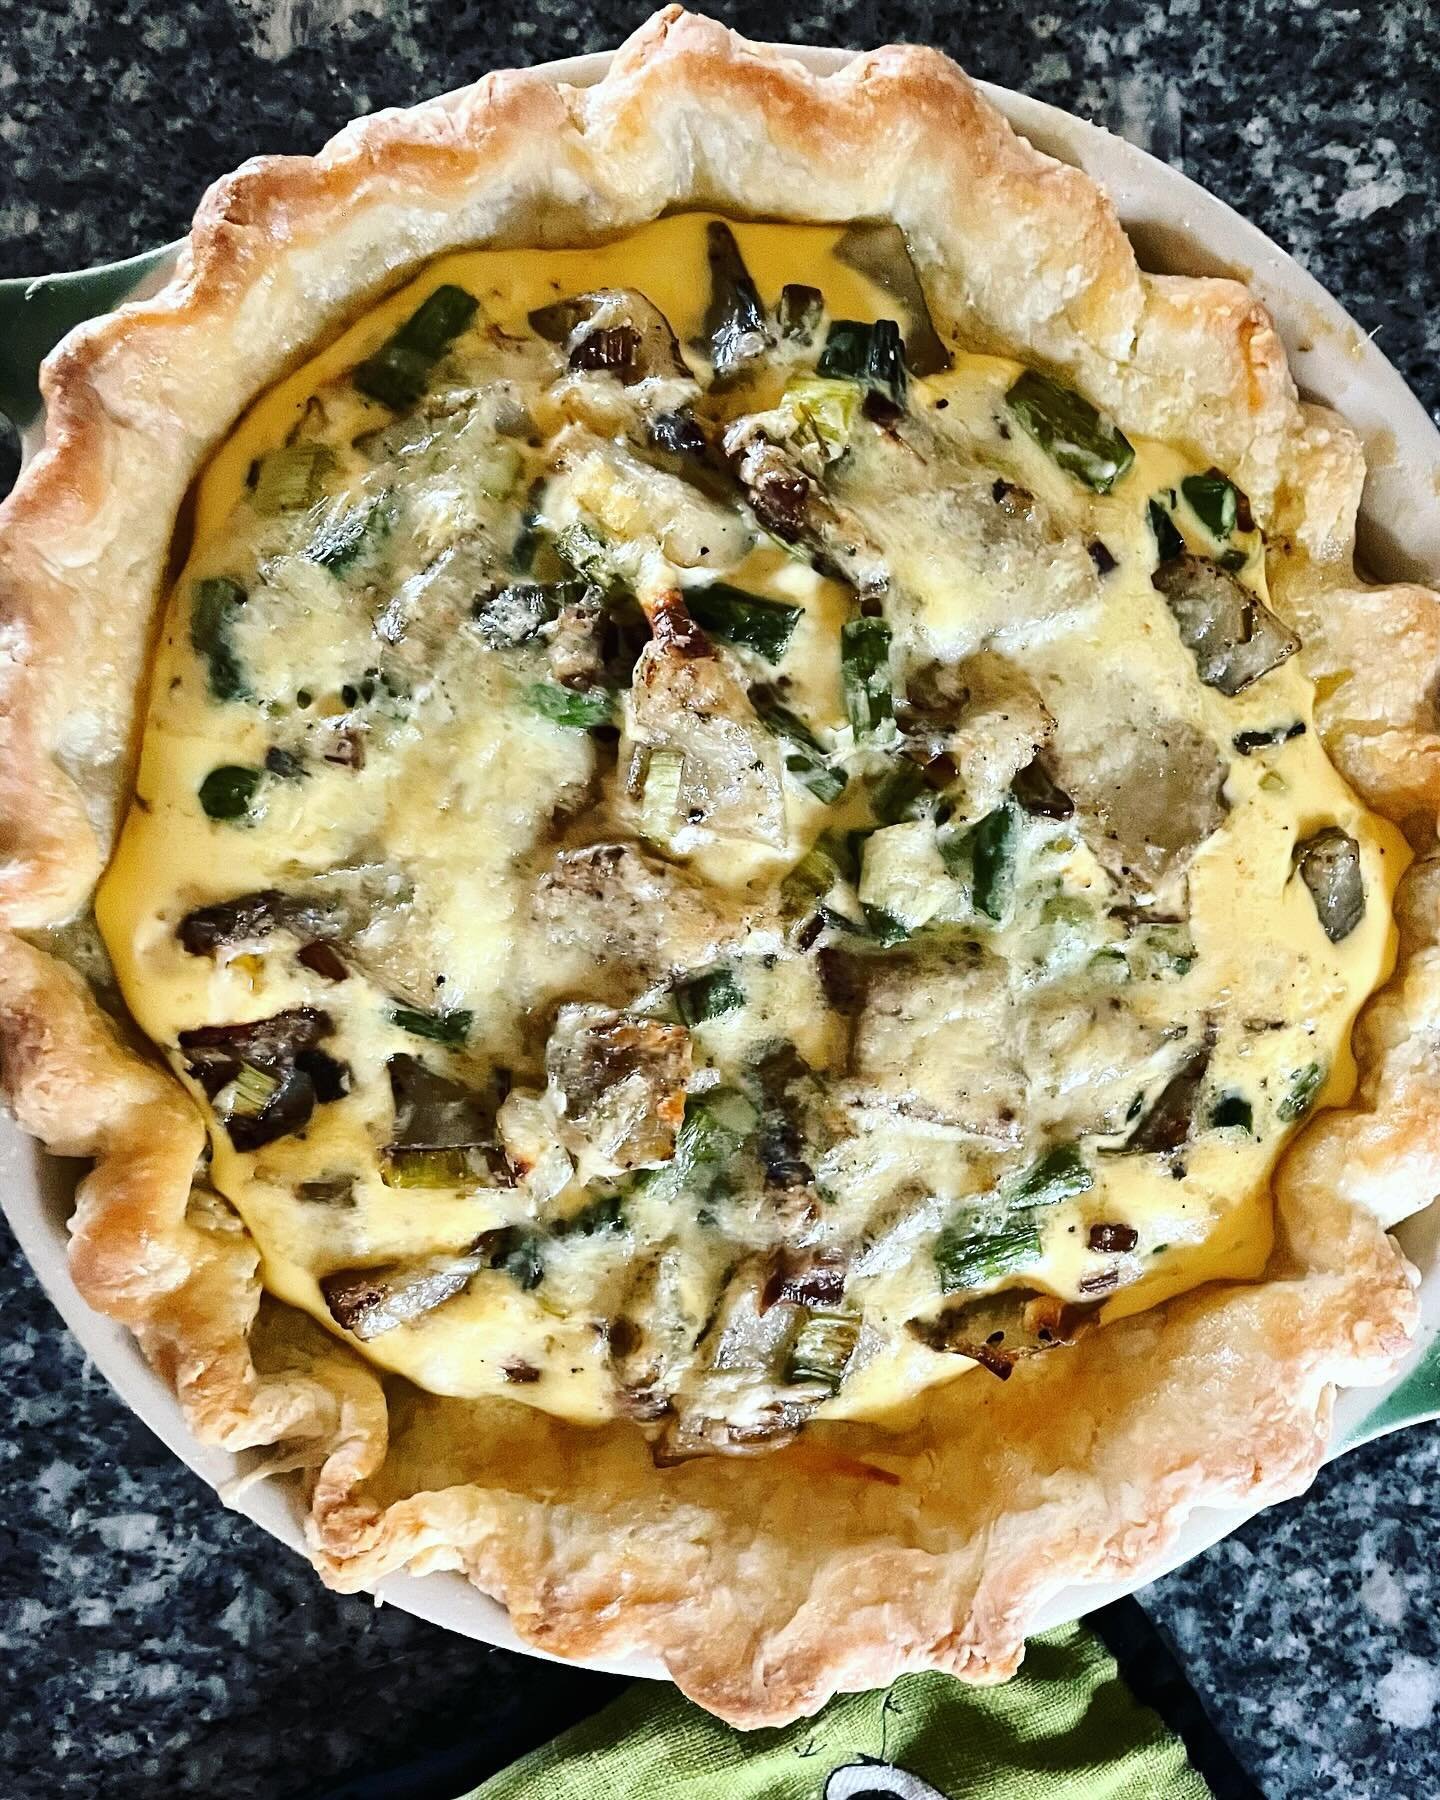 Thank you @elspethcopeland for doing all the research to make a creamy, not boingy quiche. With leek, potatoes, pancetta, asparagus, ch&egrave;vre, and your pastry recipe, it was delicious! I still need to work on my custard!